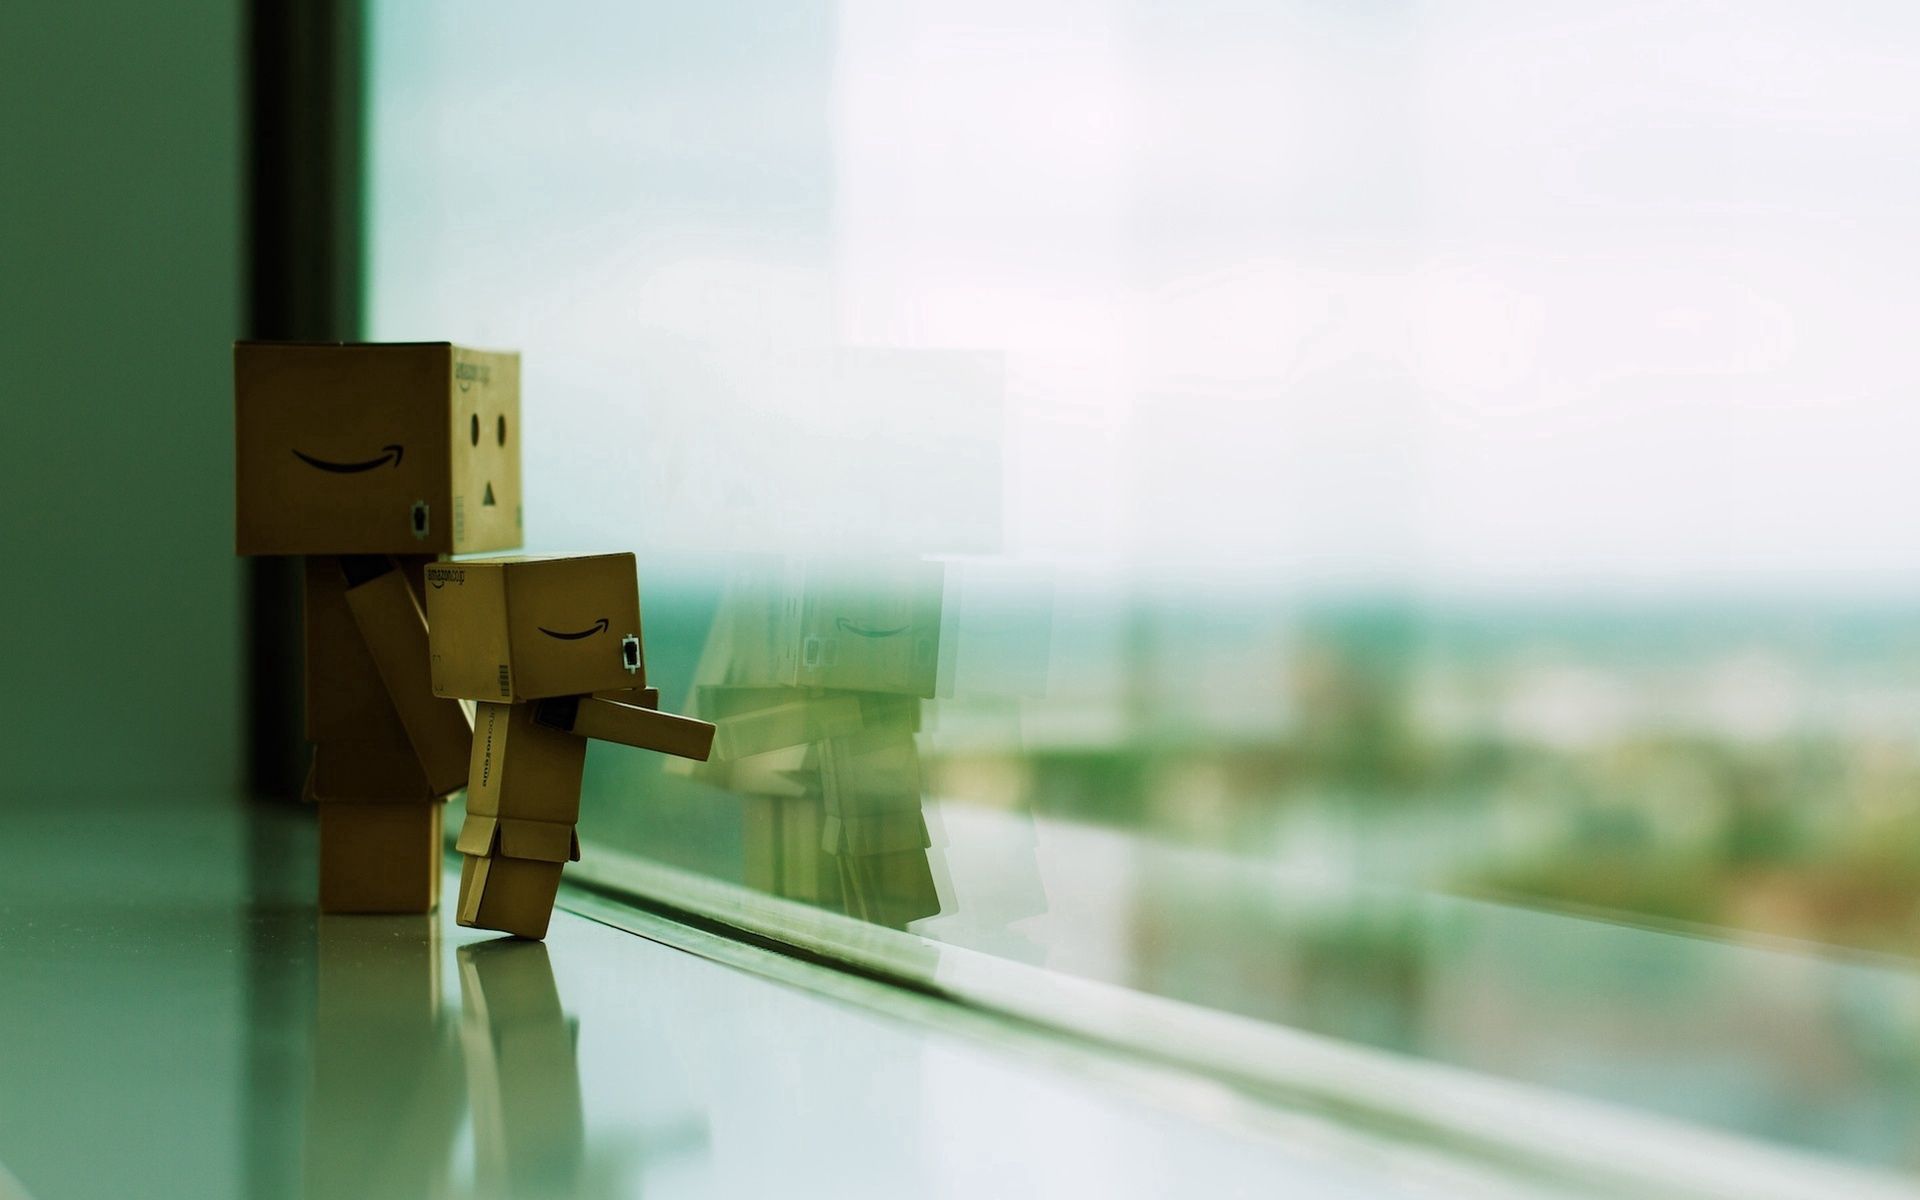 miscellanea, miscellaneous, couple, pair, window, cardboard robot, to stand, stand, danboard cellphone